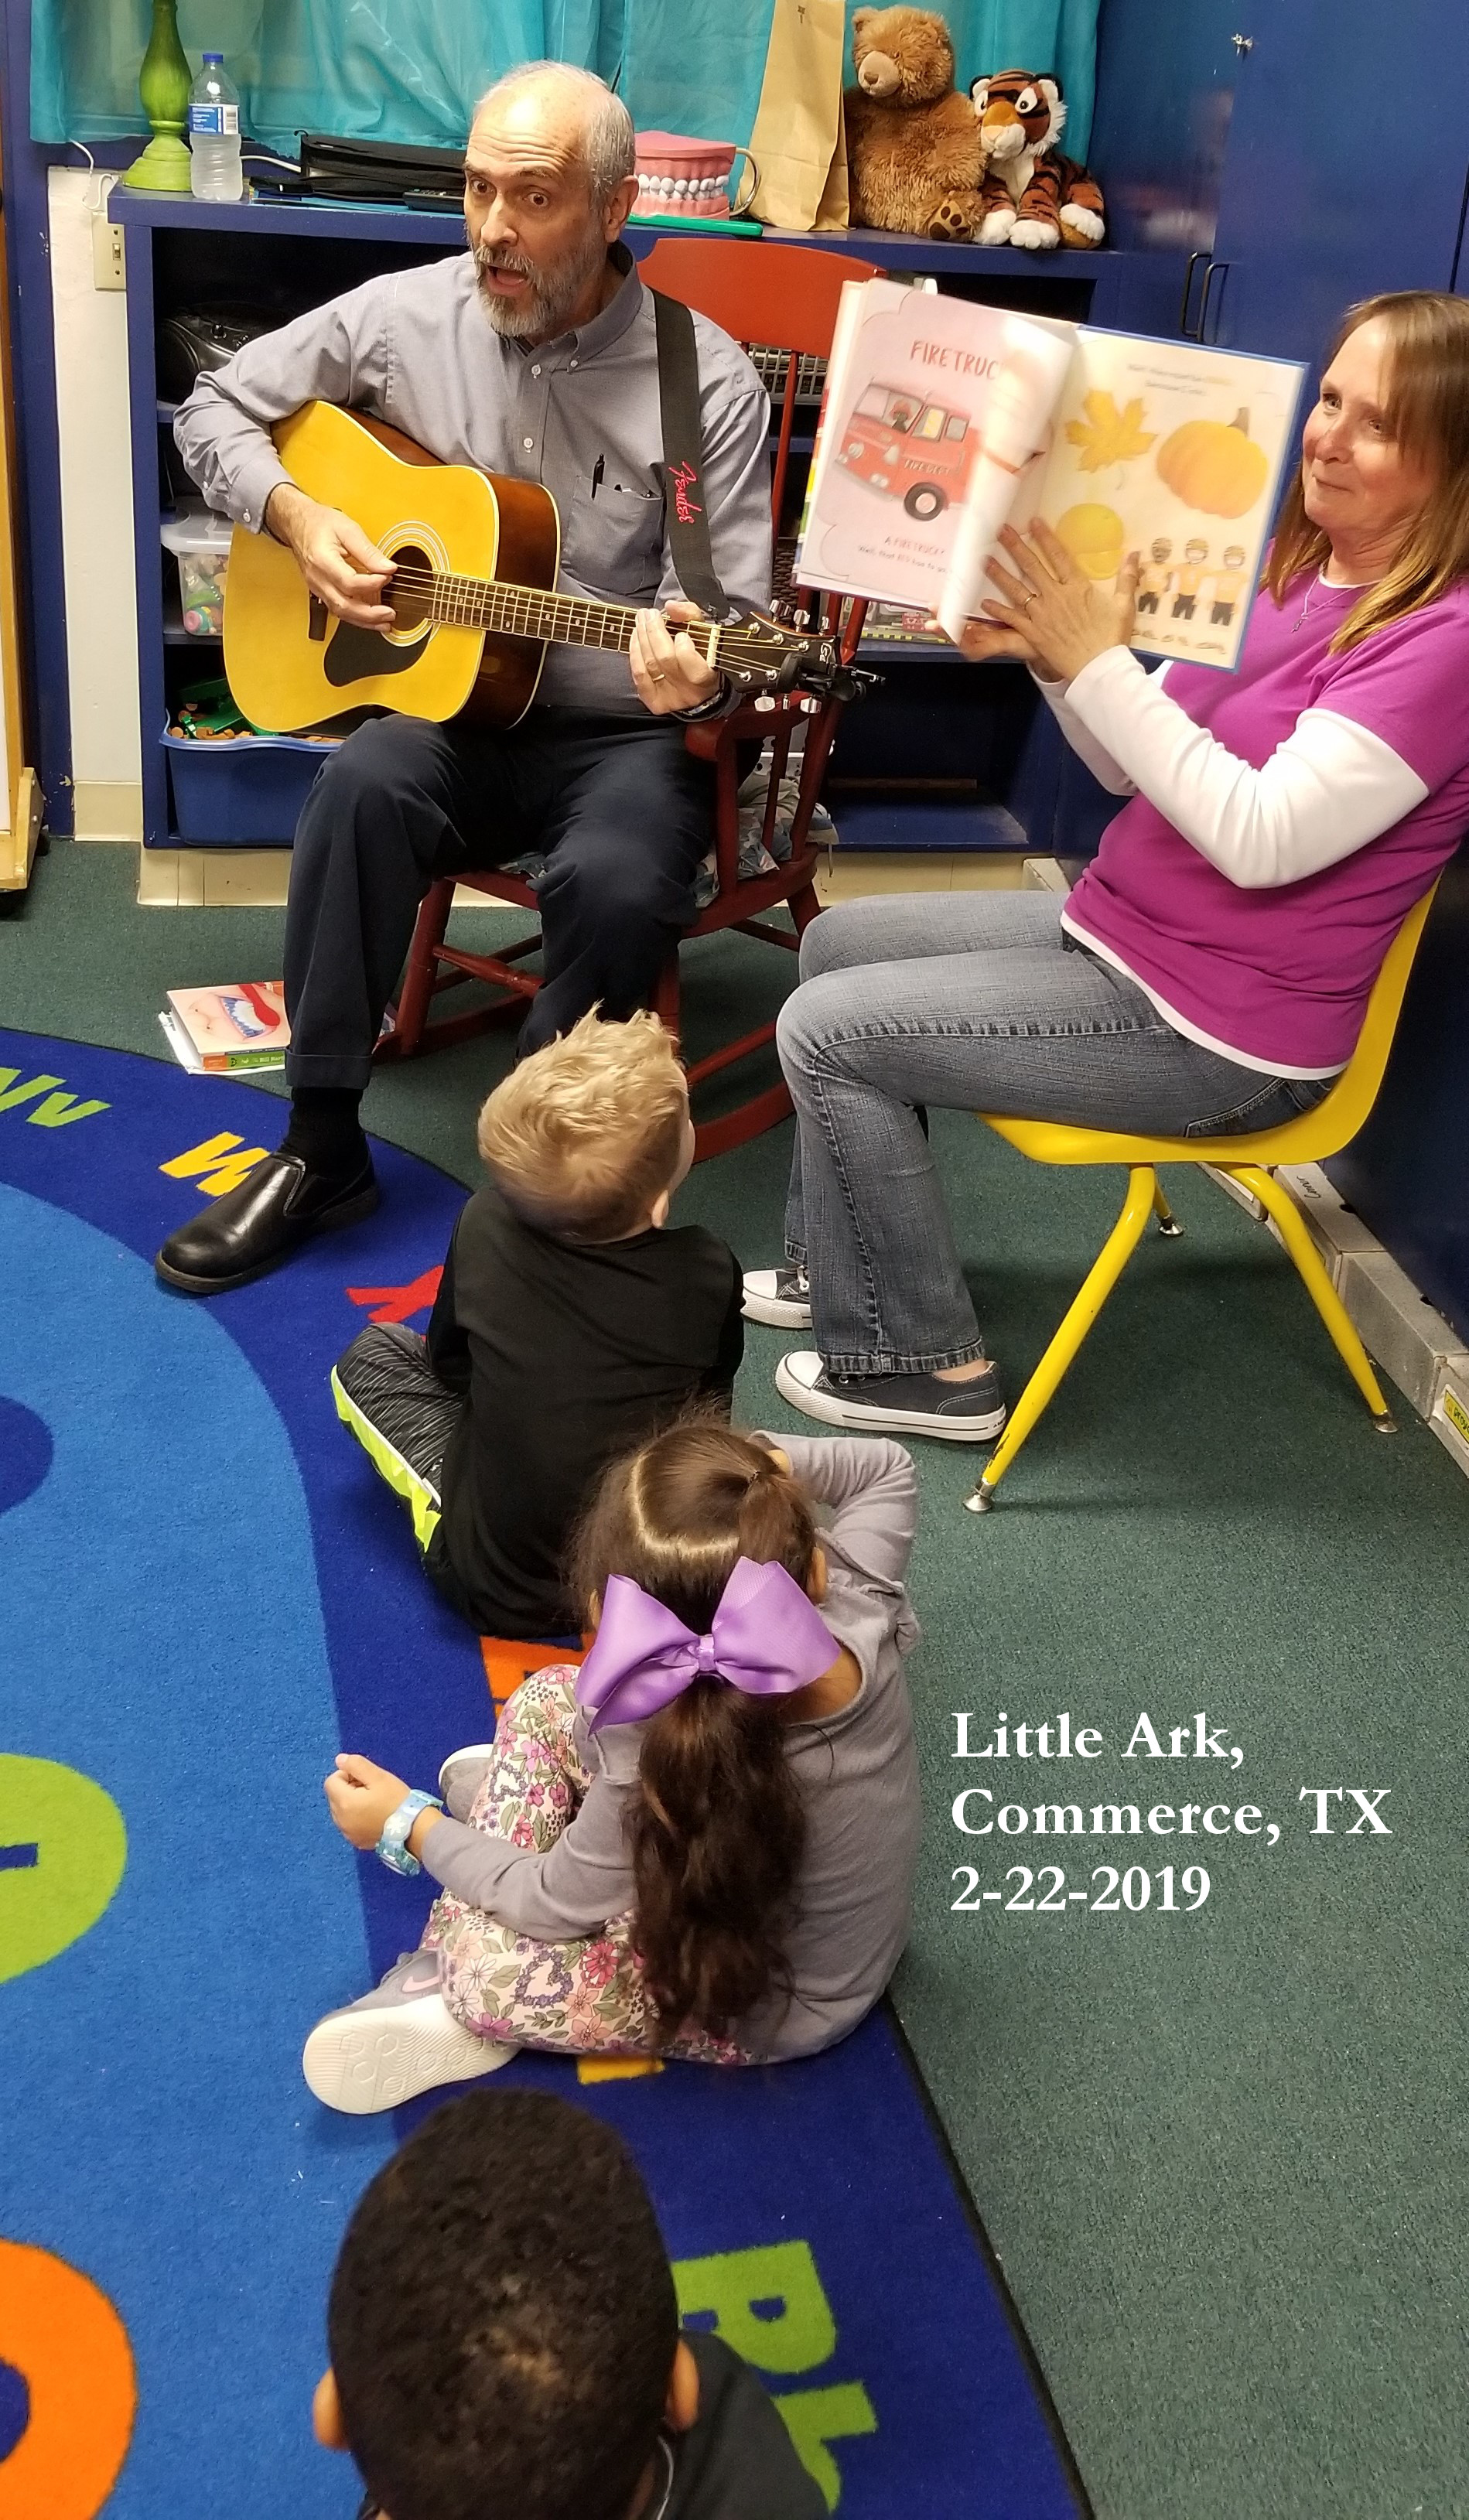 DC at Little Ark 2-22-19 w text.jpg